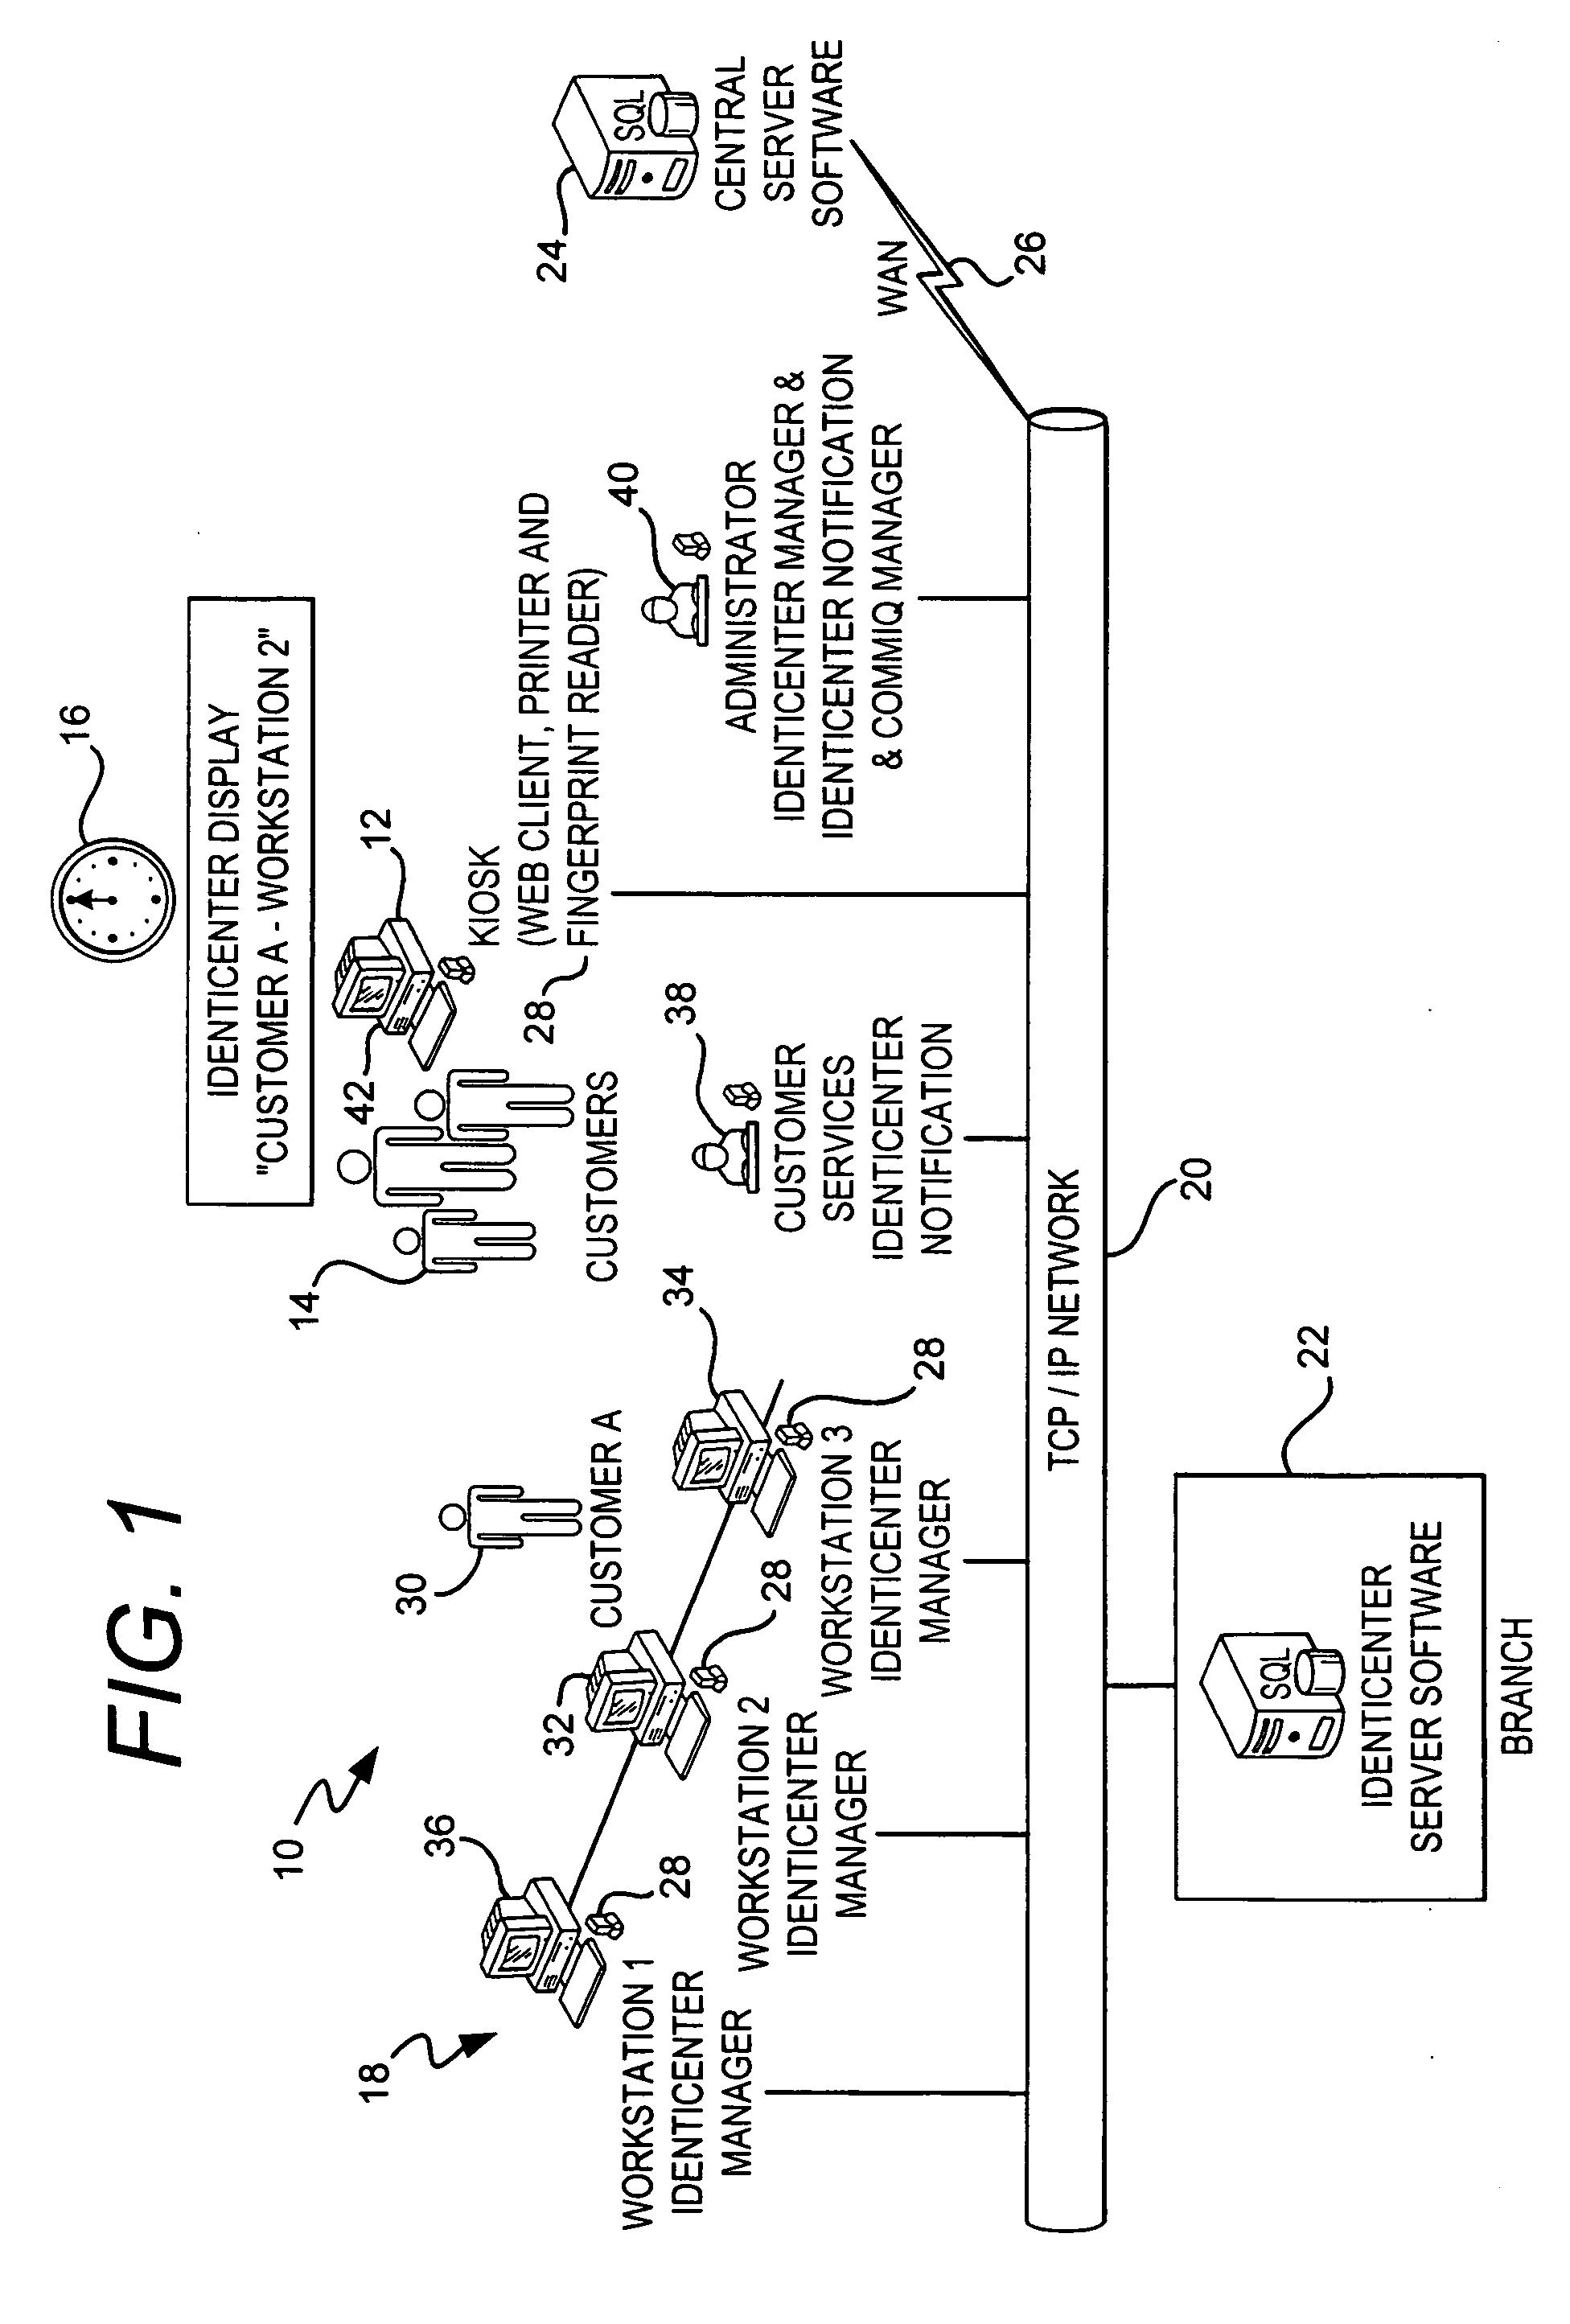 System and method for identifying and managing customers in a financial institution